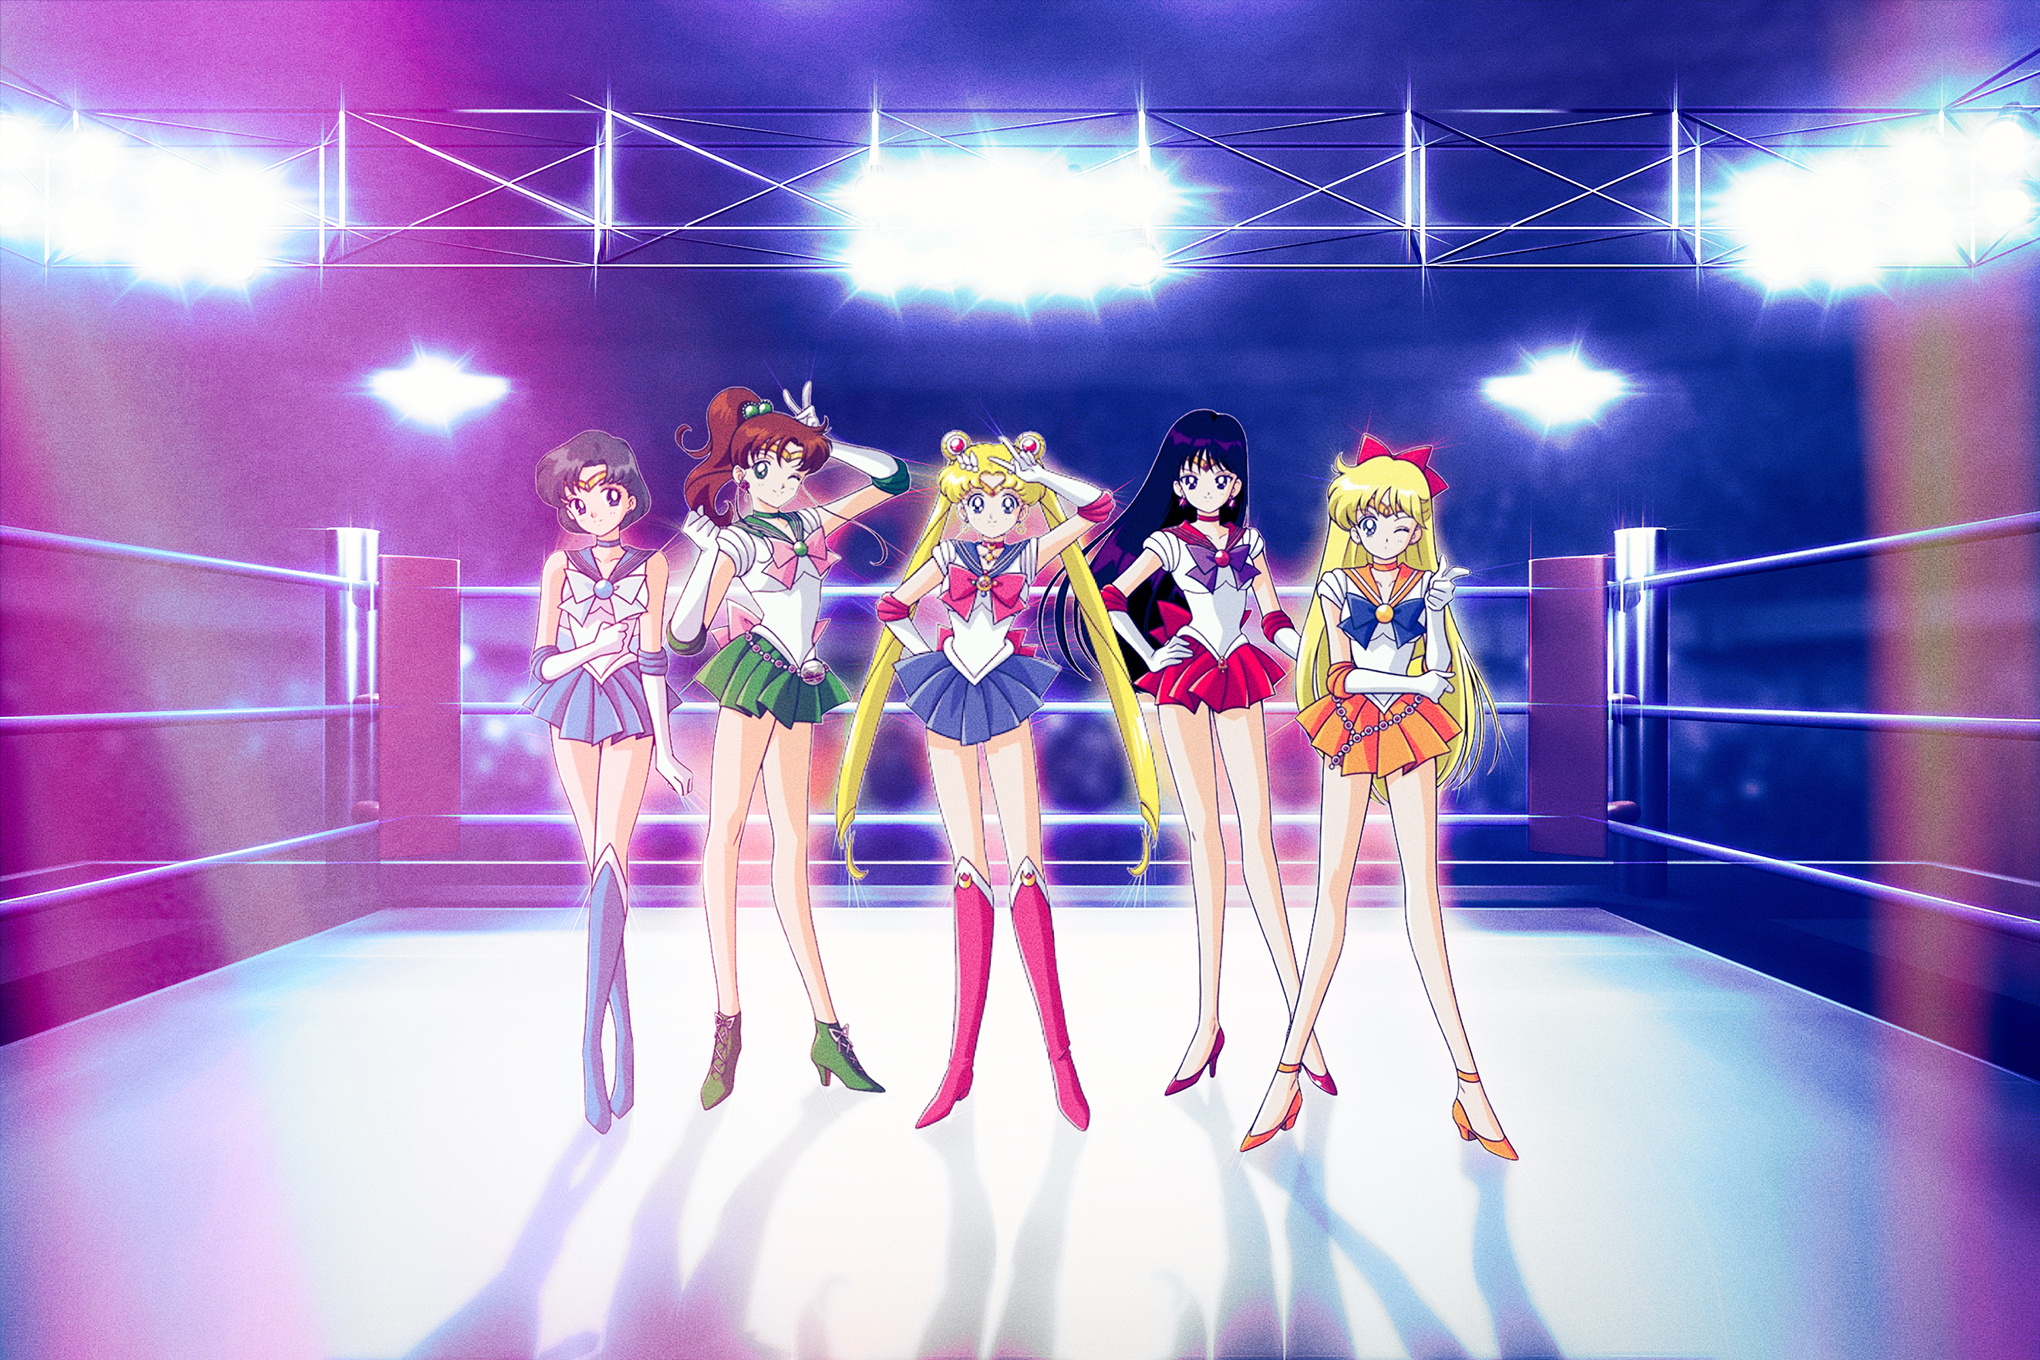 The Sailor Guardians from Sailor Moon standing in the middle of a wrestling ring illuminated by large floodlights.